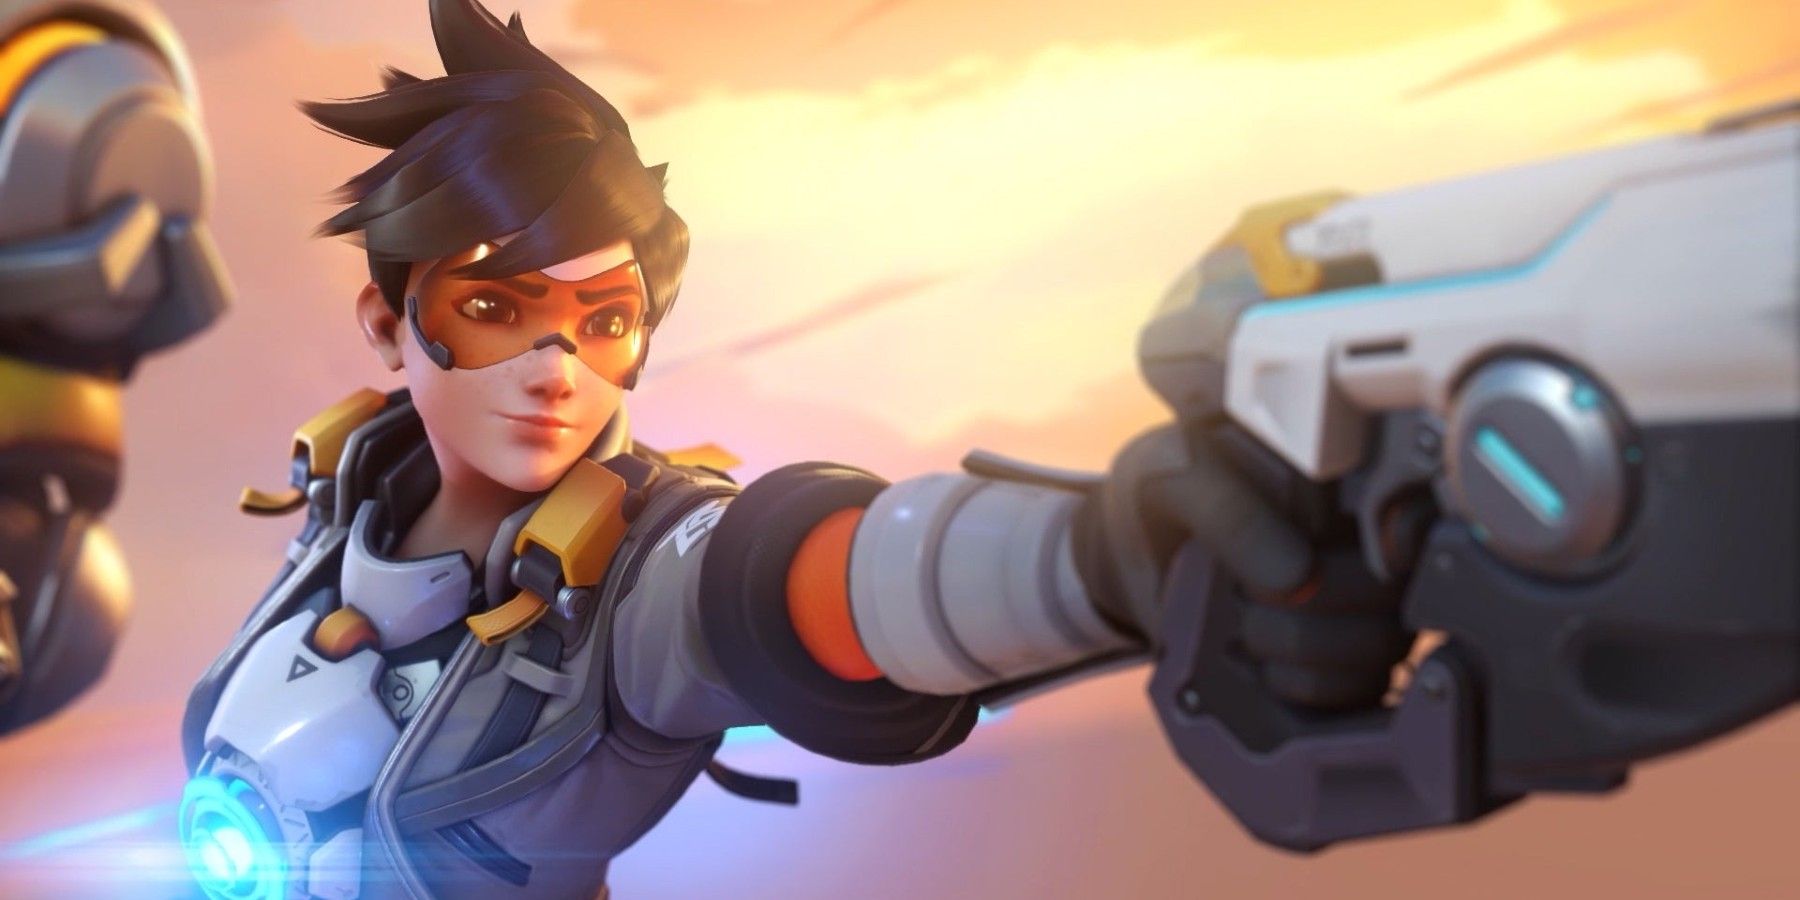 Overwatch 2 Player Gets Rare Team Kill With Tracer’s Pulse Bomb